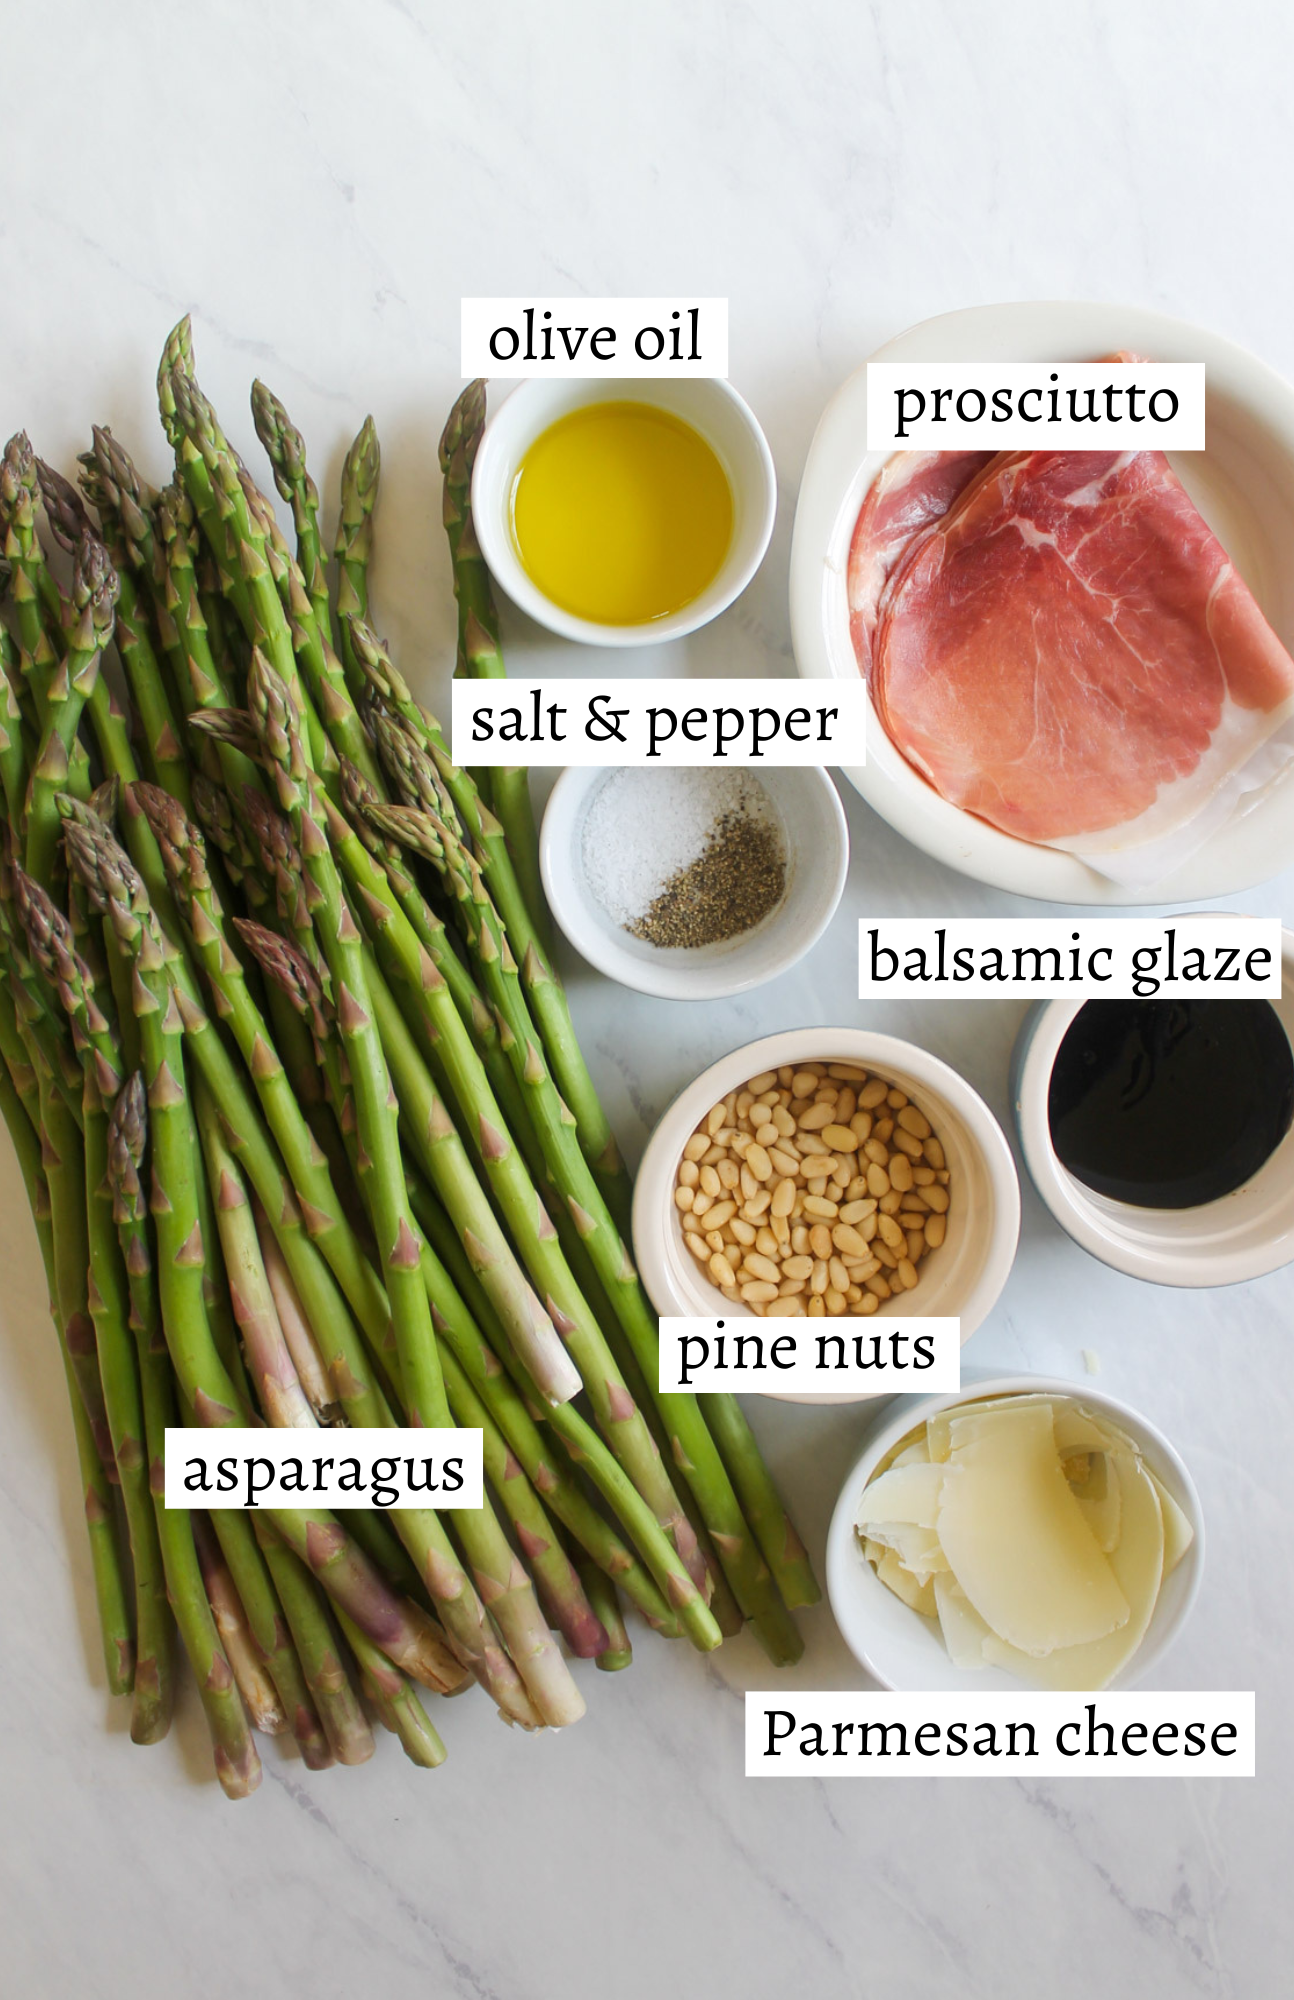 Labeled ingredients for roasted asparagus with balsamic glaze.